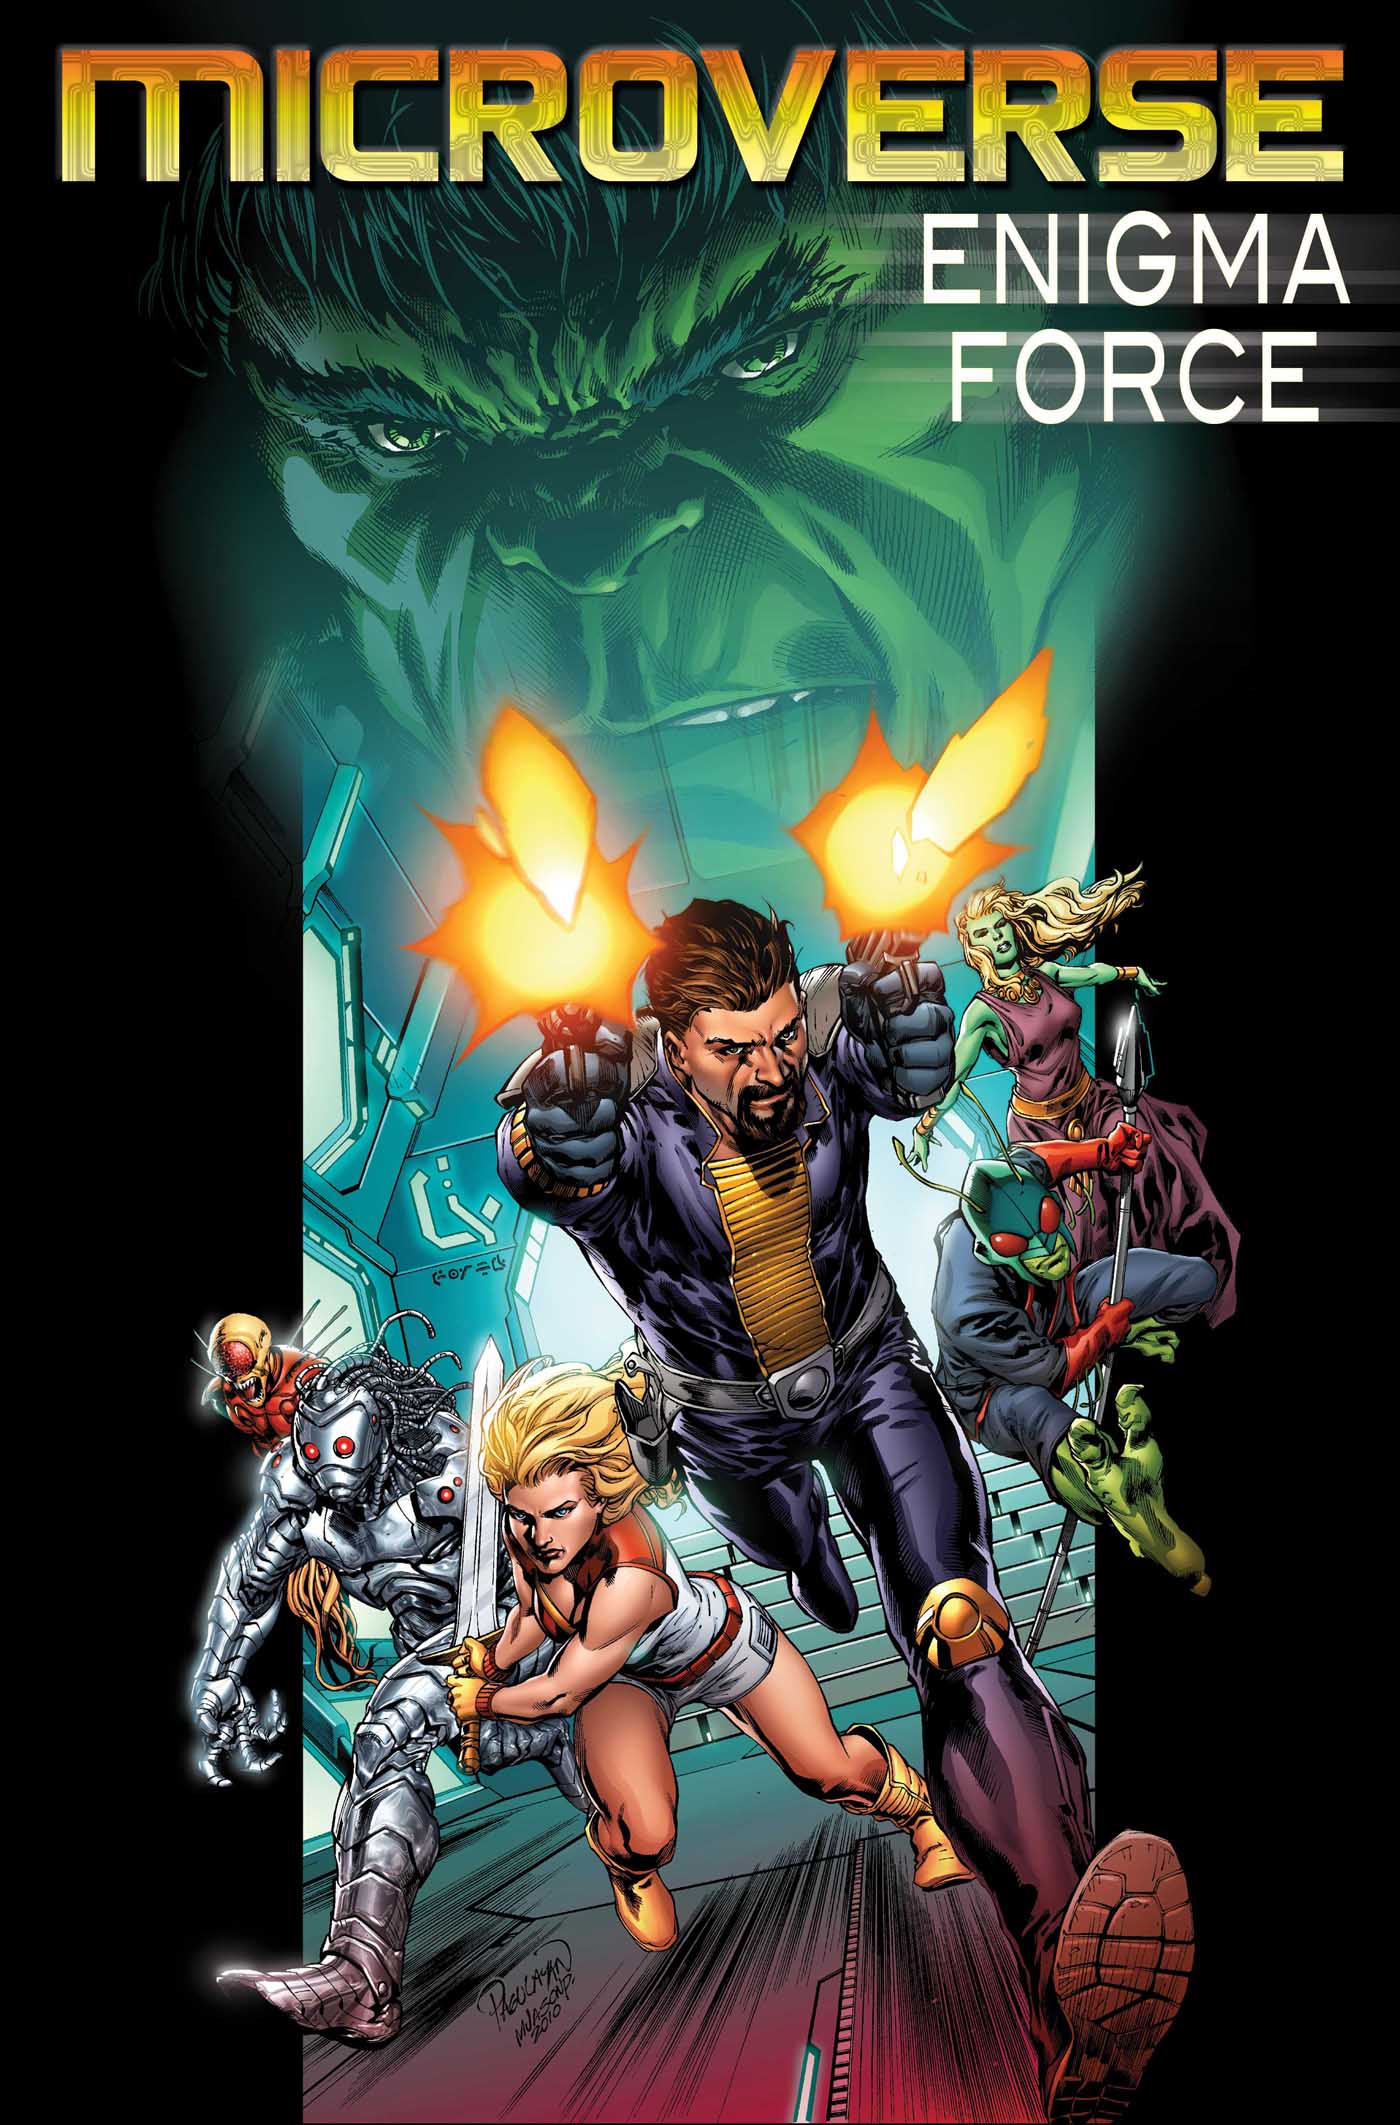 Microverse: Enigma Force (2010) #1